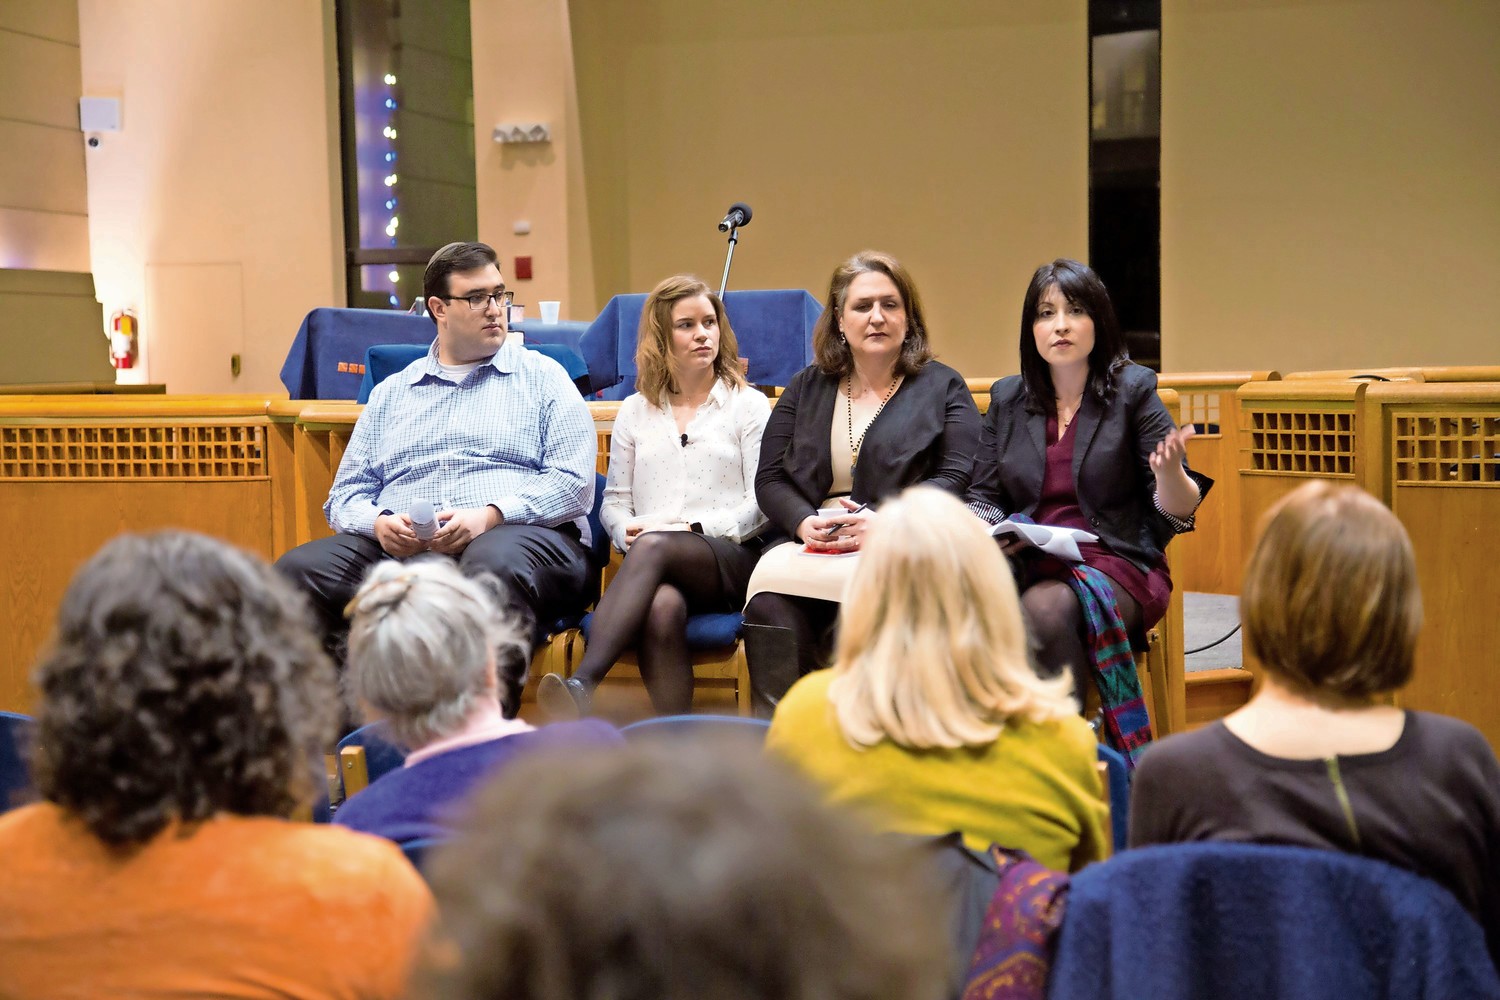 Lauren Schuster, the chief of staff for assemblywoman Linda B. Rosenthal, speaks about the importance of passing the Child Victims Act at a panel discussion at the Hebrew Institute of Riverdale.